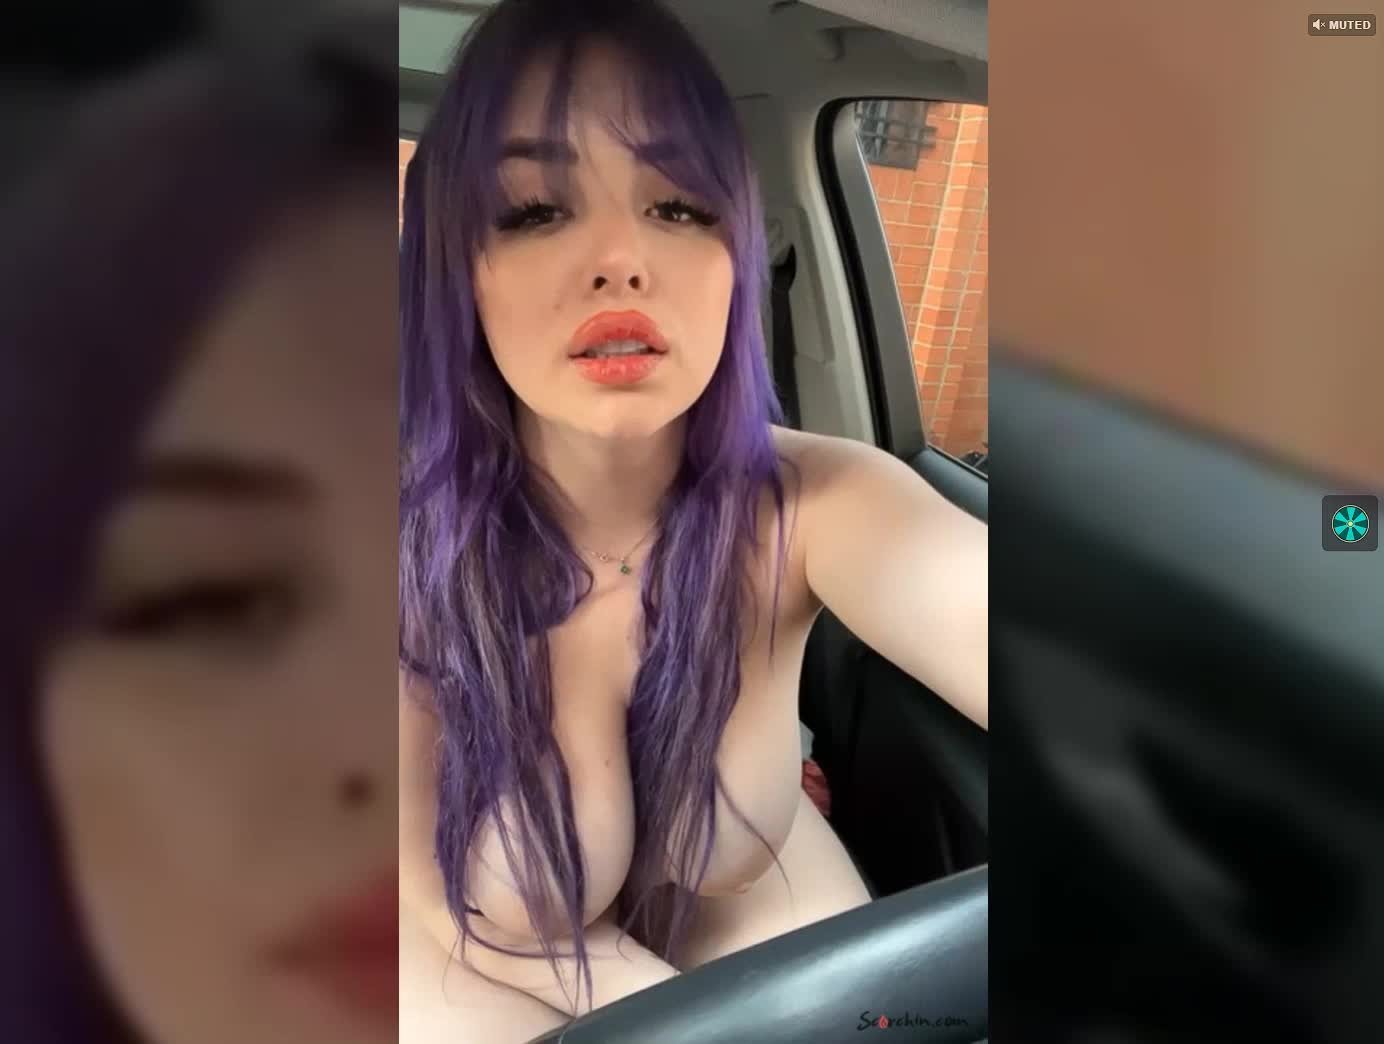 Watch the Video by PregHoes with the username @PregHoes, posted on November 22, 2021. The post is about the topic Public Voyeur. and the text says '#Outdoors #Car #Stream #Nude'